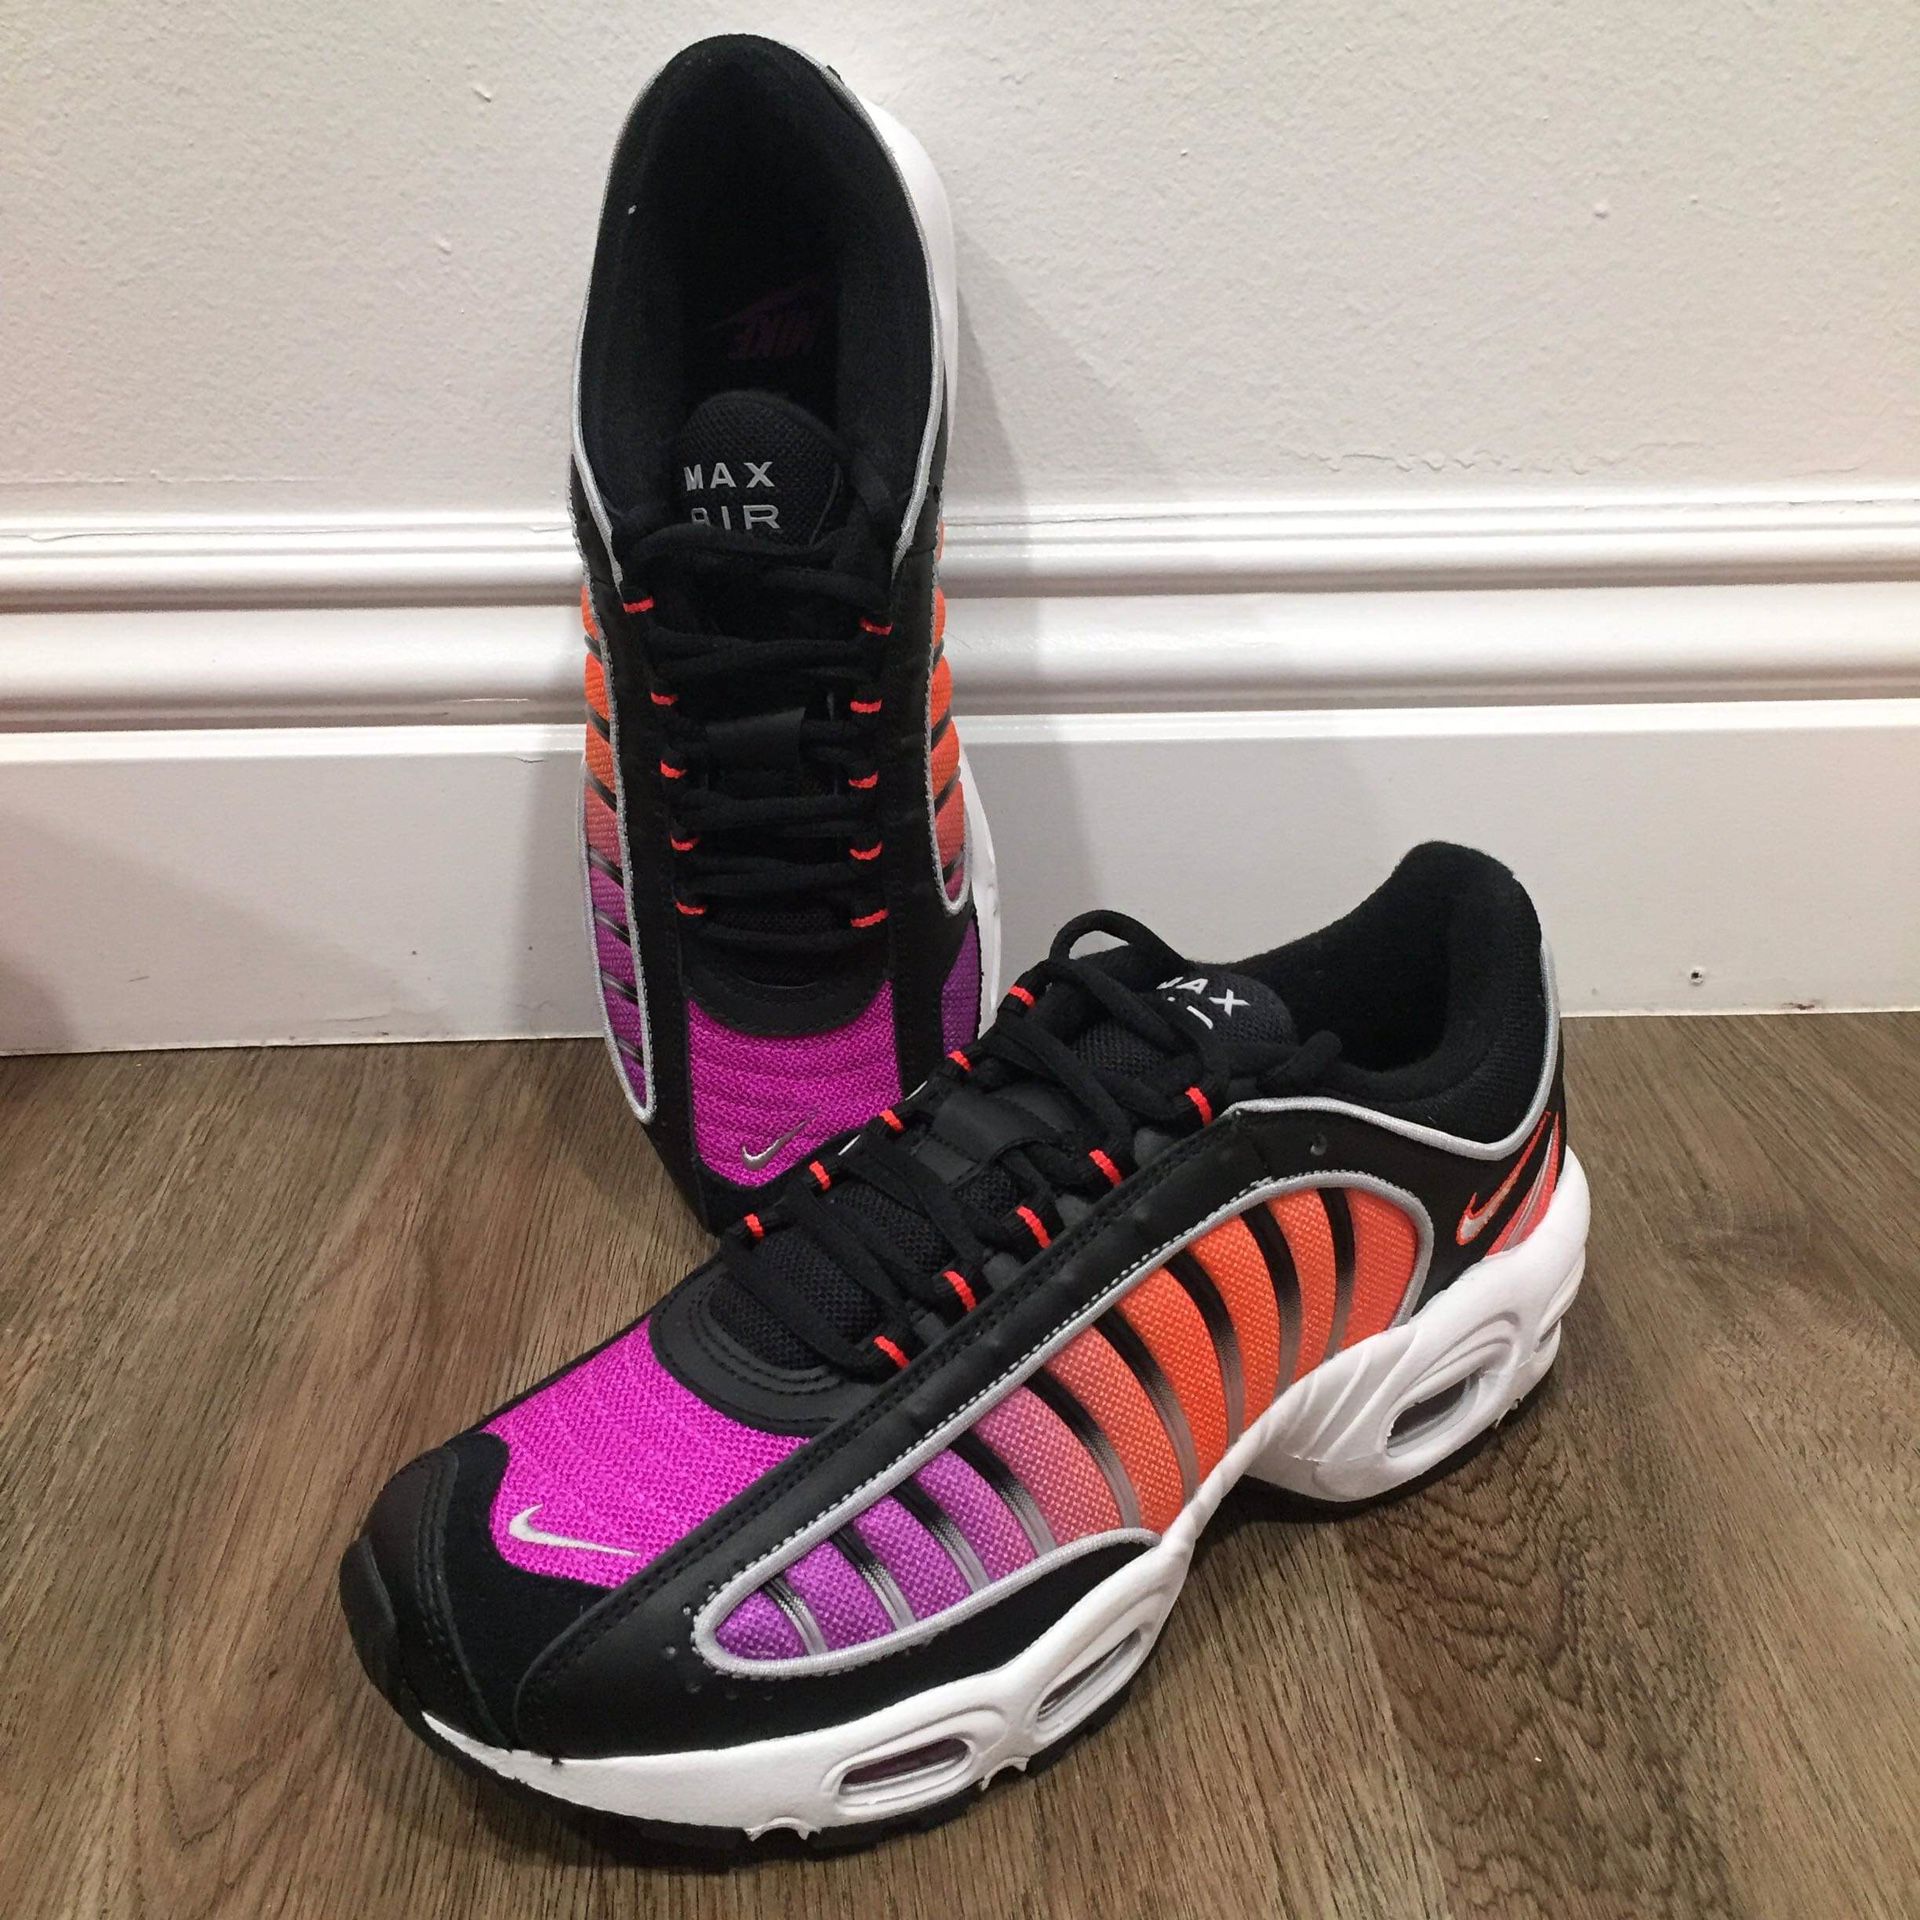 New Shoes Nike Air Max Tailwind Women Size 10.0 And Men Size 8.5 Authentic